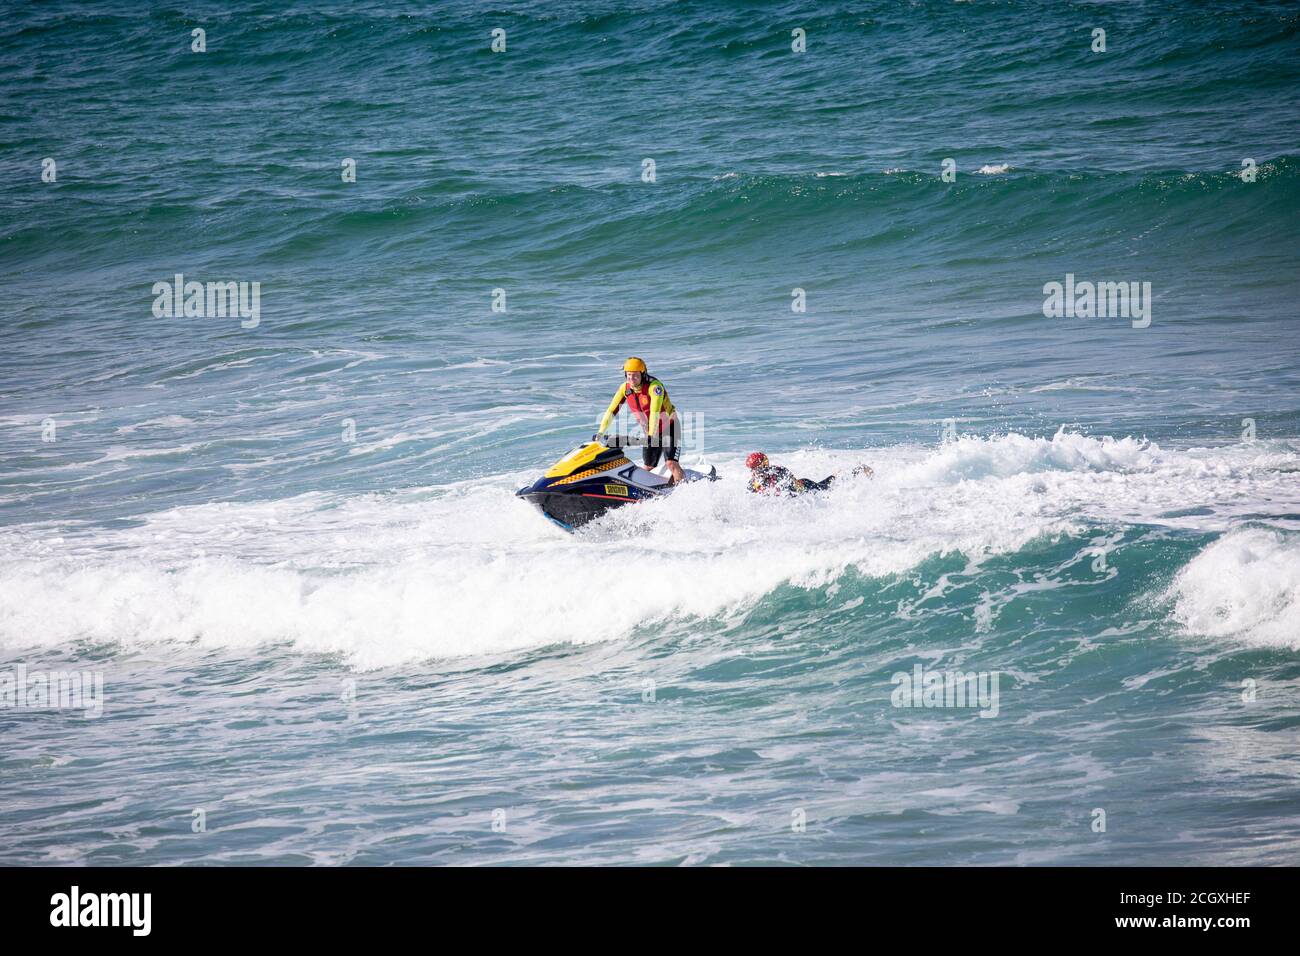 Sydney surf rescue lifeguards at Palm beach practice water manoeuvres and training on their jet ski watercraft, Sydney,NSW,Australia Stock Photo